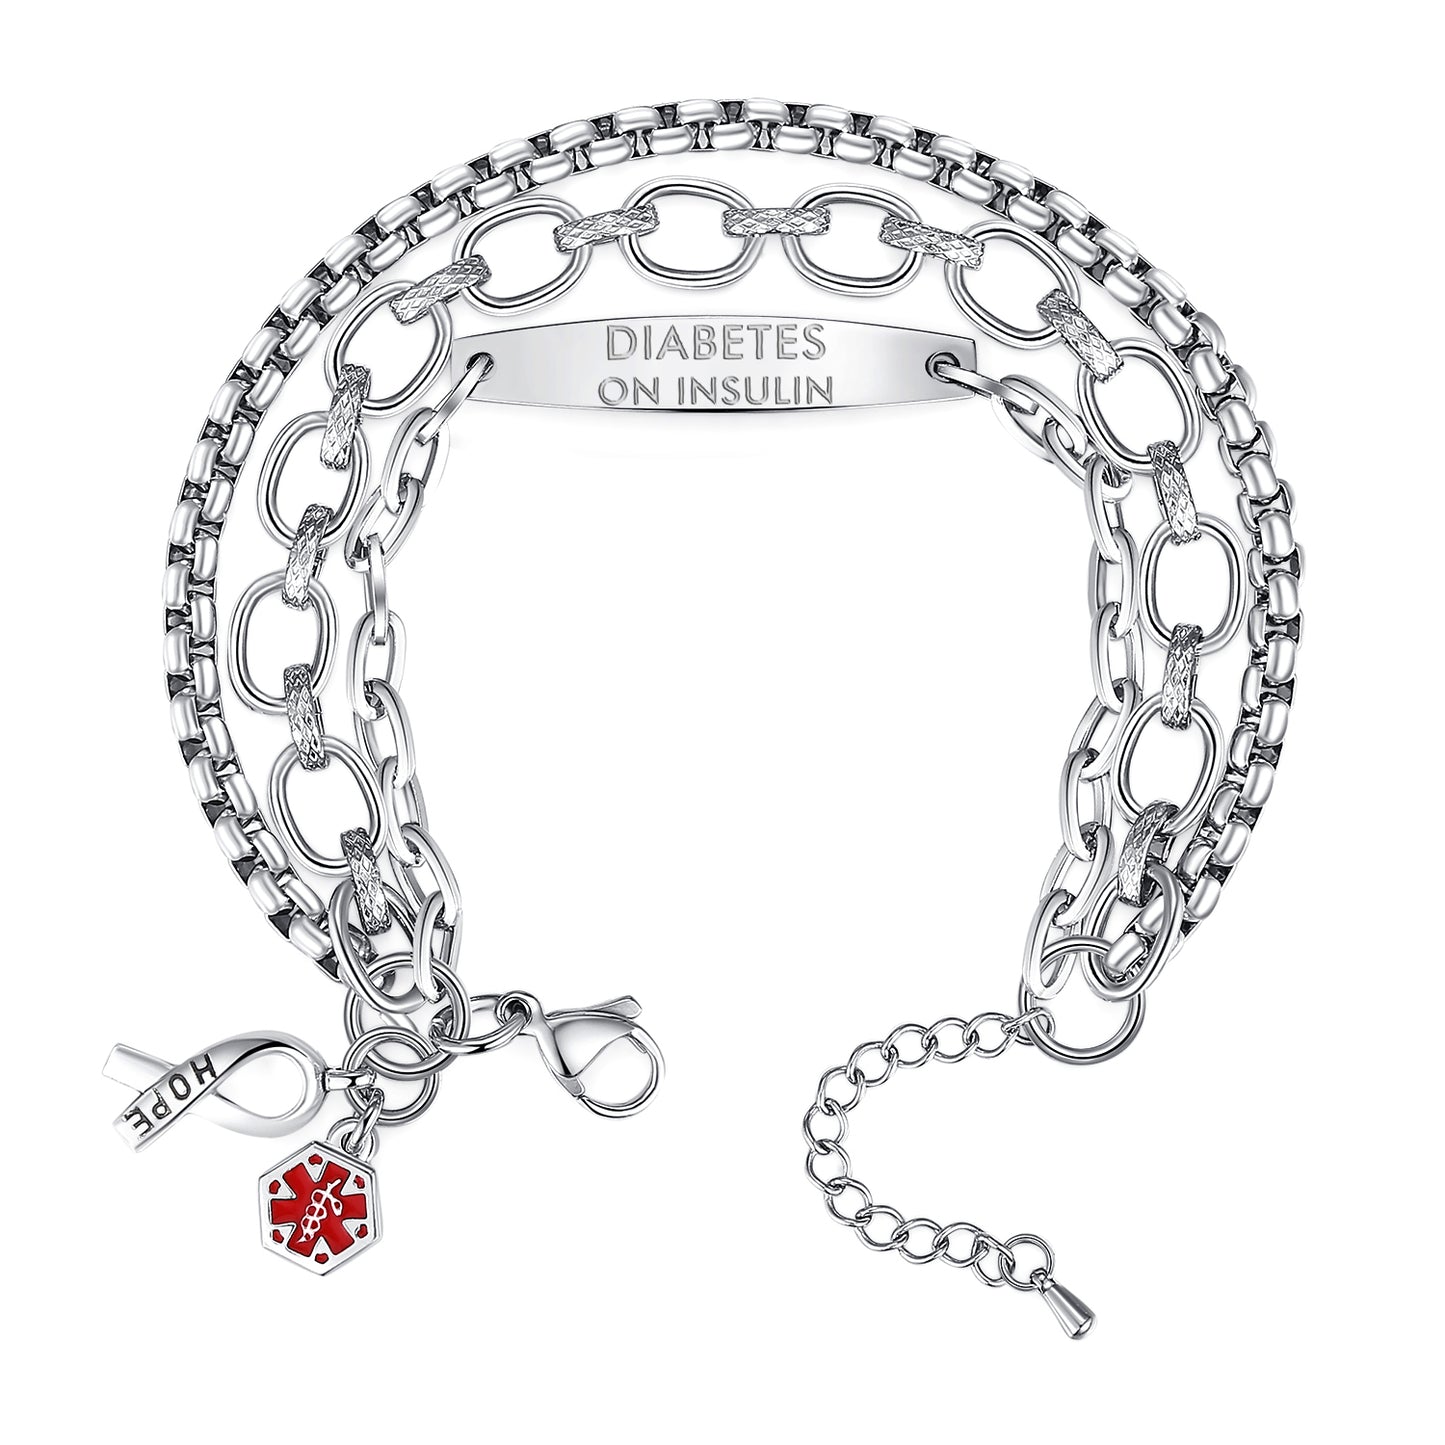 linnalove Distinctive design and fashionable wrap multi-chain medical alert bracelets for women with hope ribbons and medical id charm